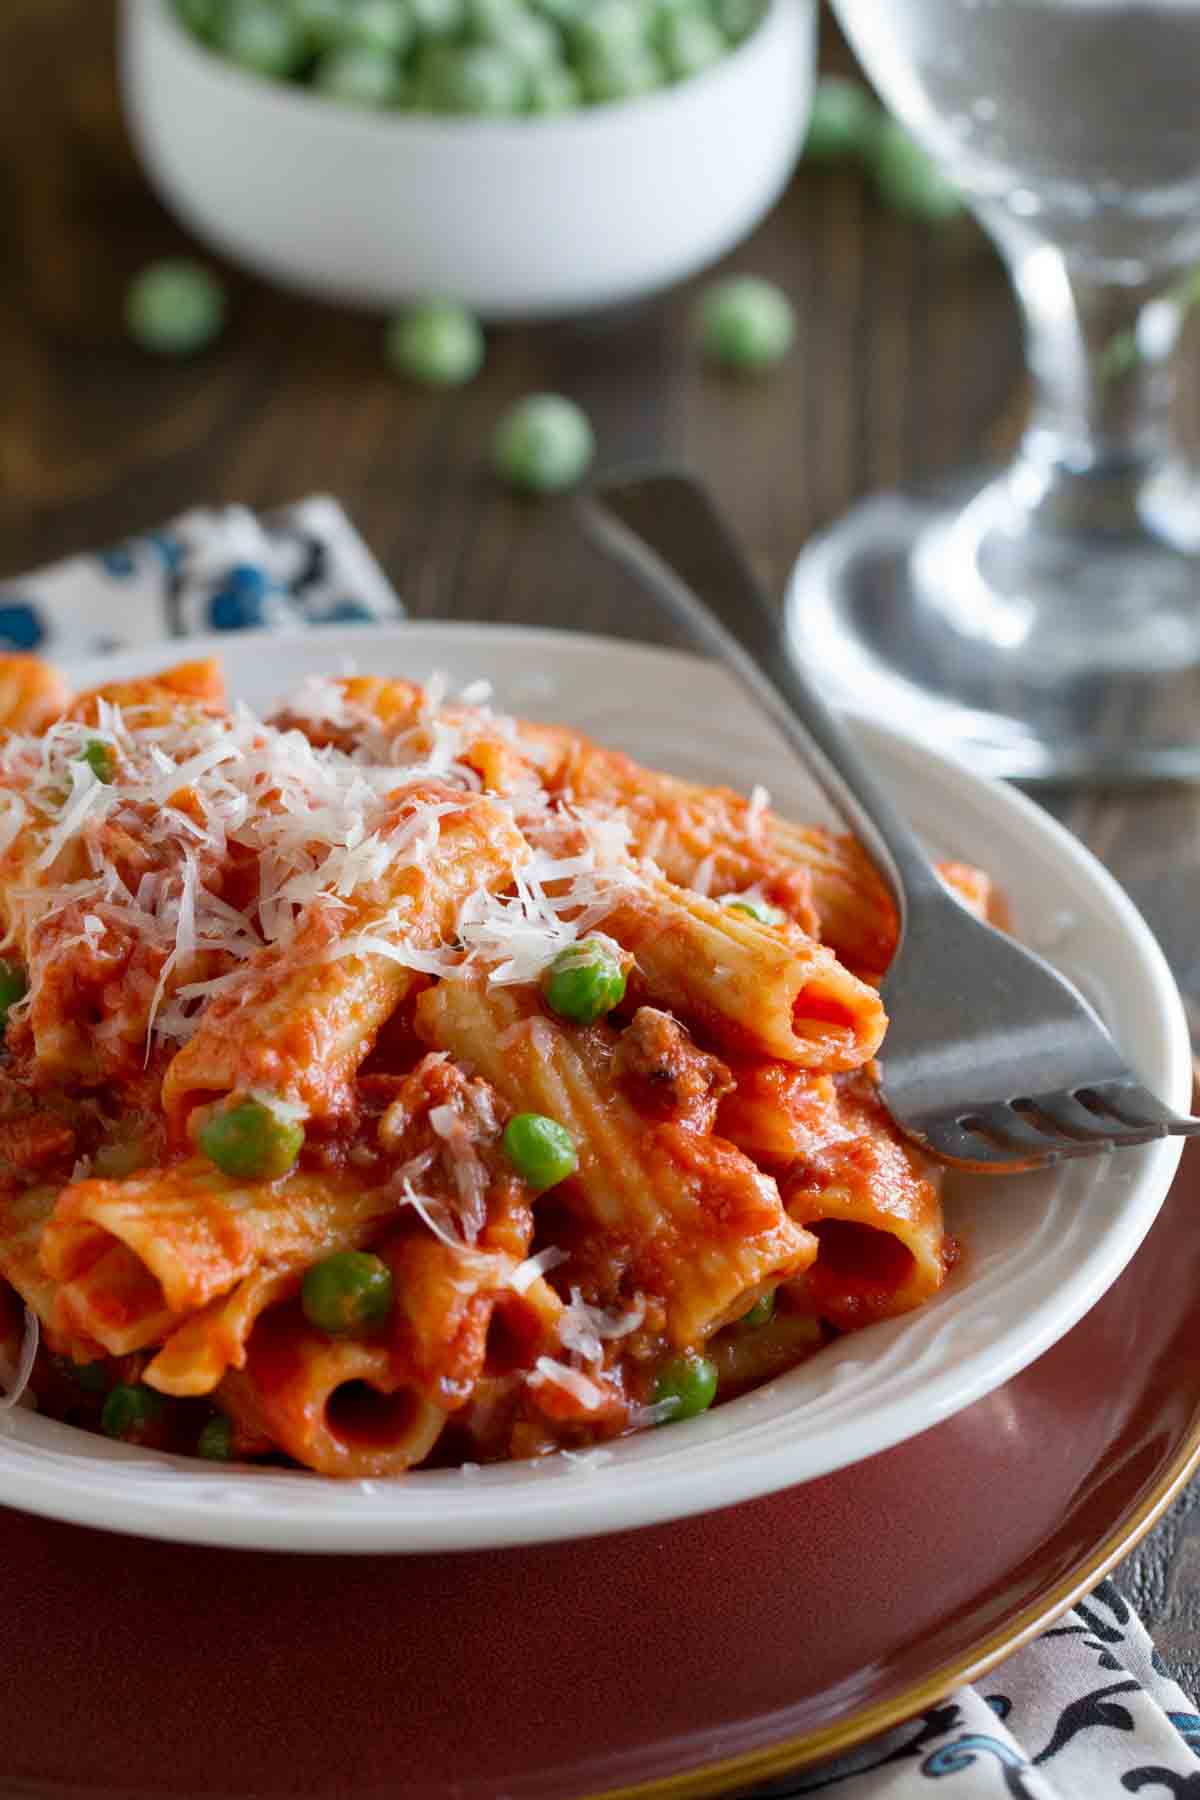 Rigatoni with Sausage, Peas, Tomatoes and Cream in a dish